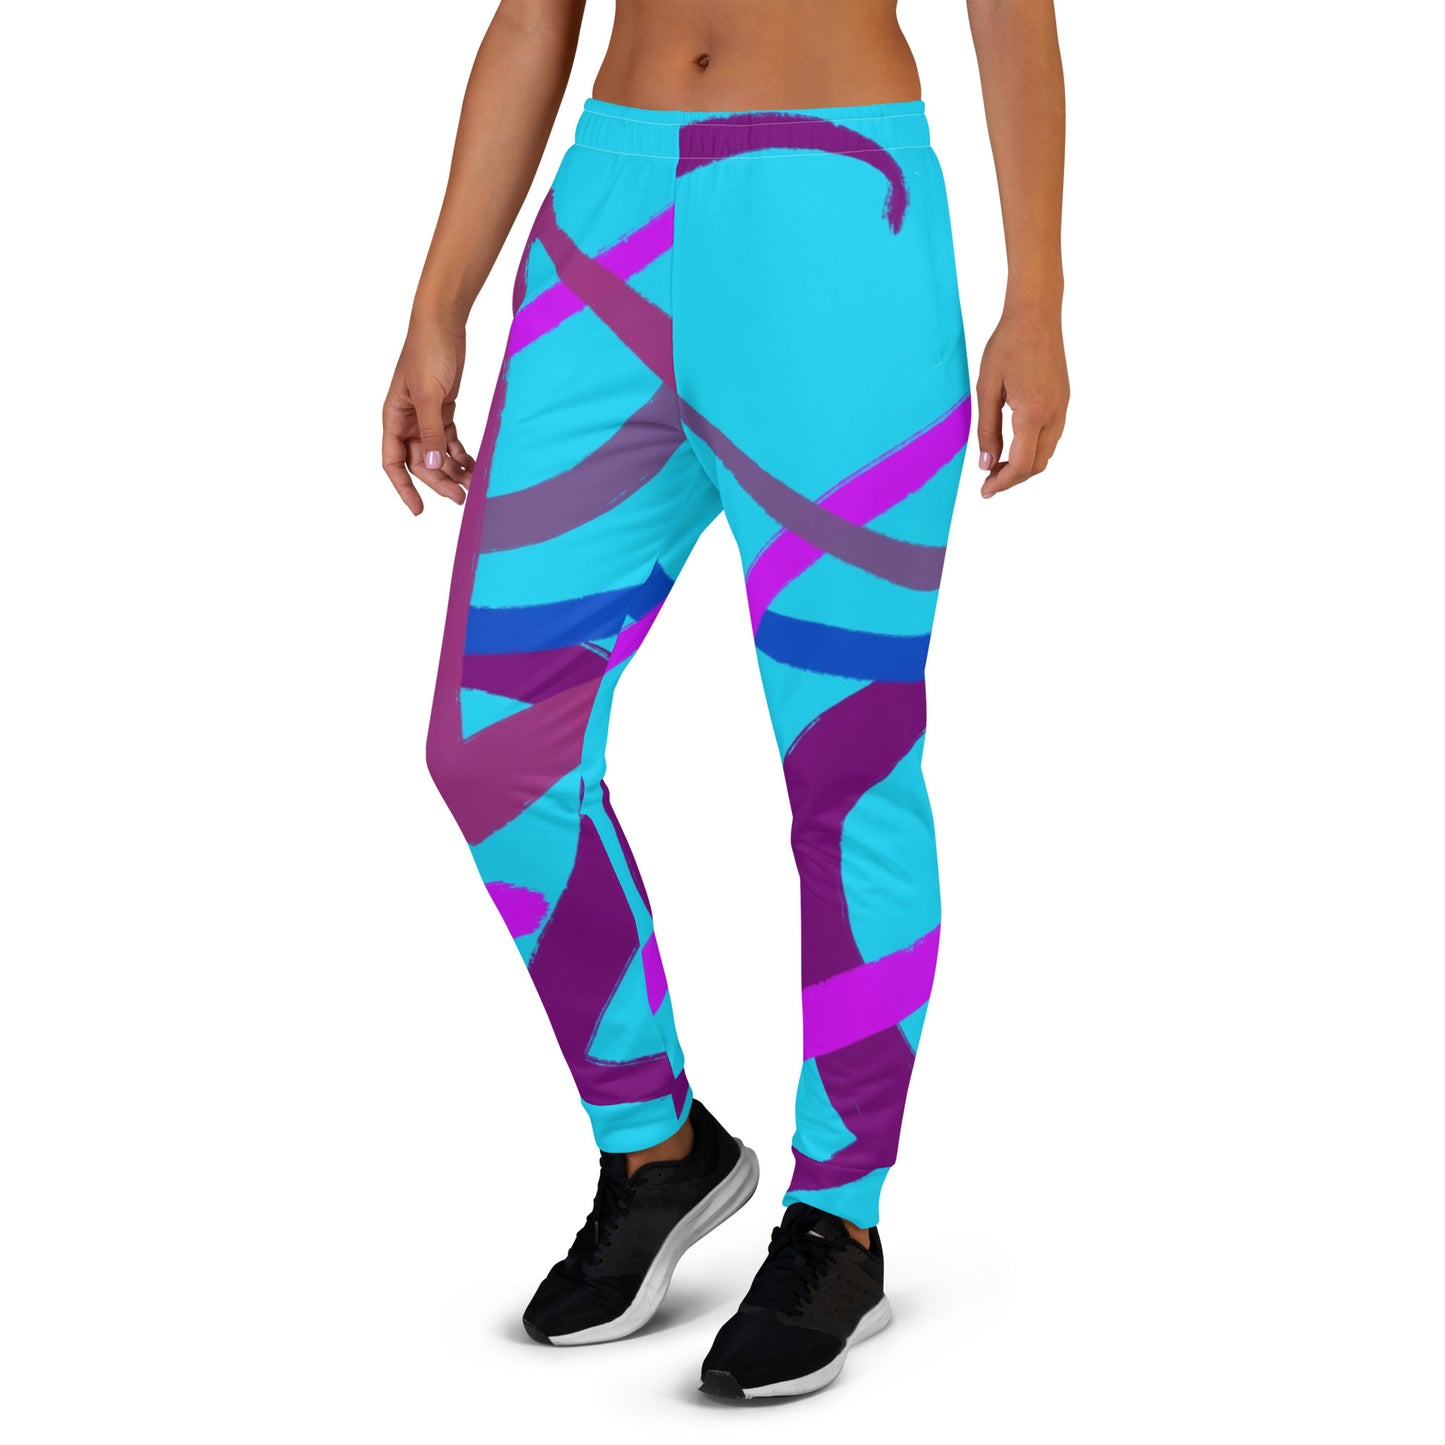 Women's "Be Your Bliss" Joggers